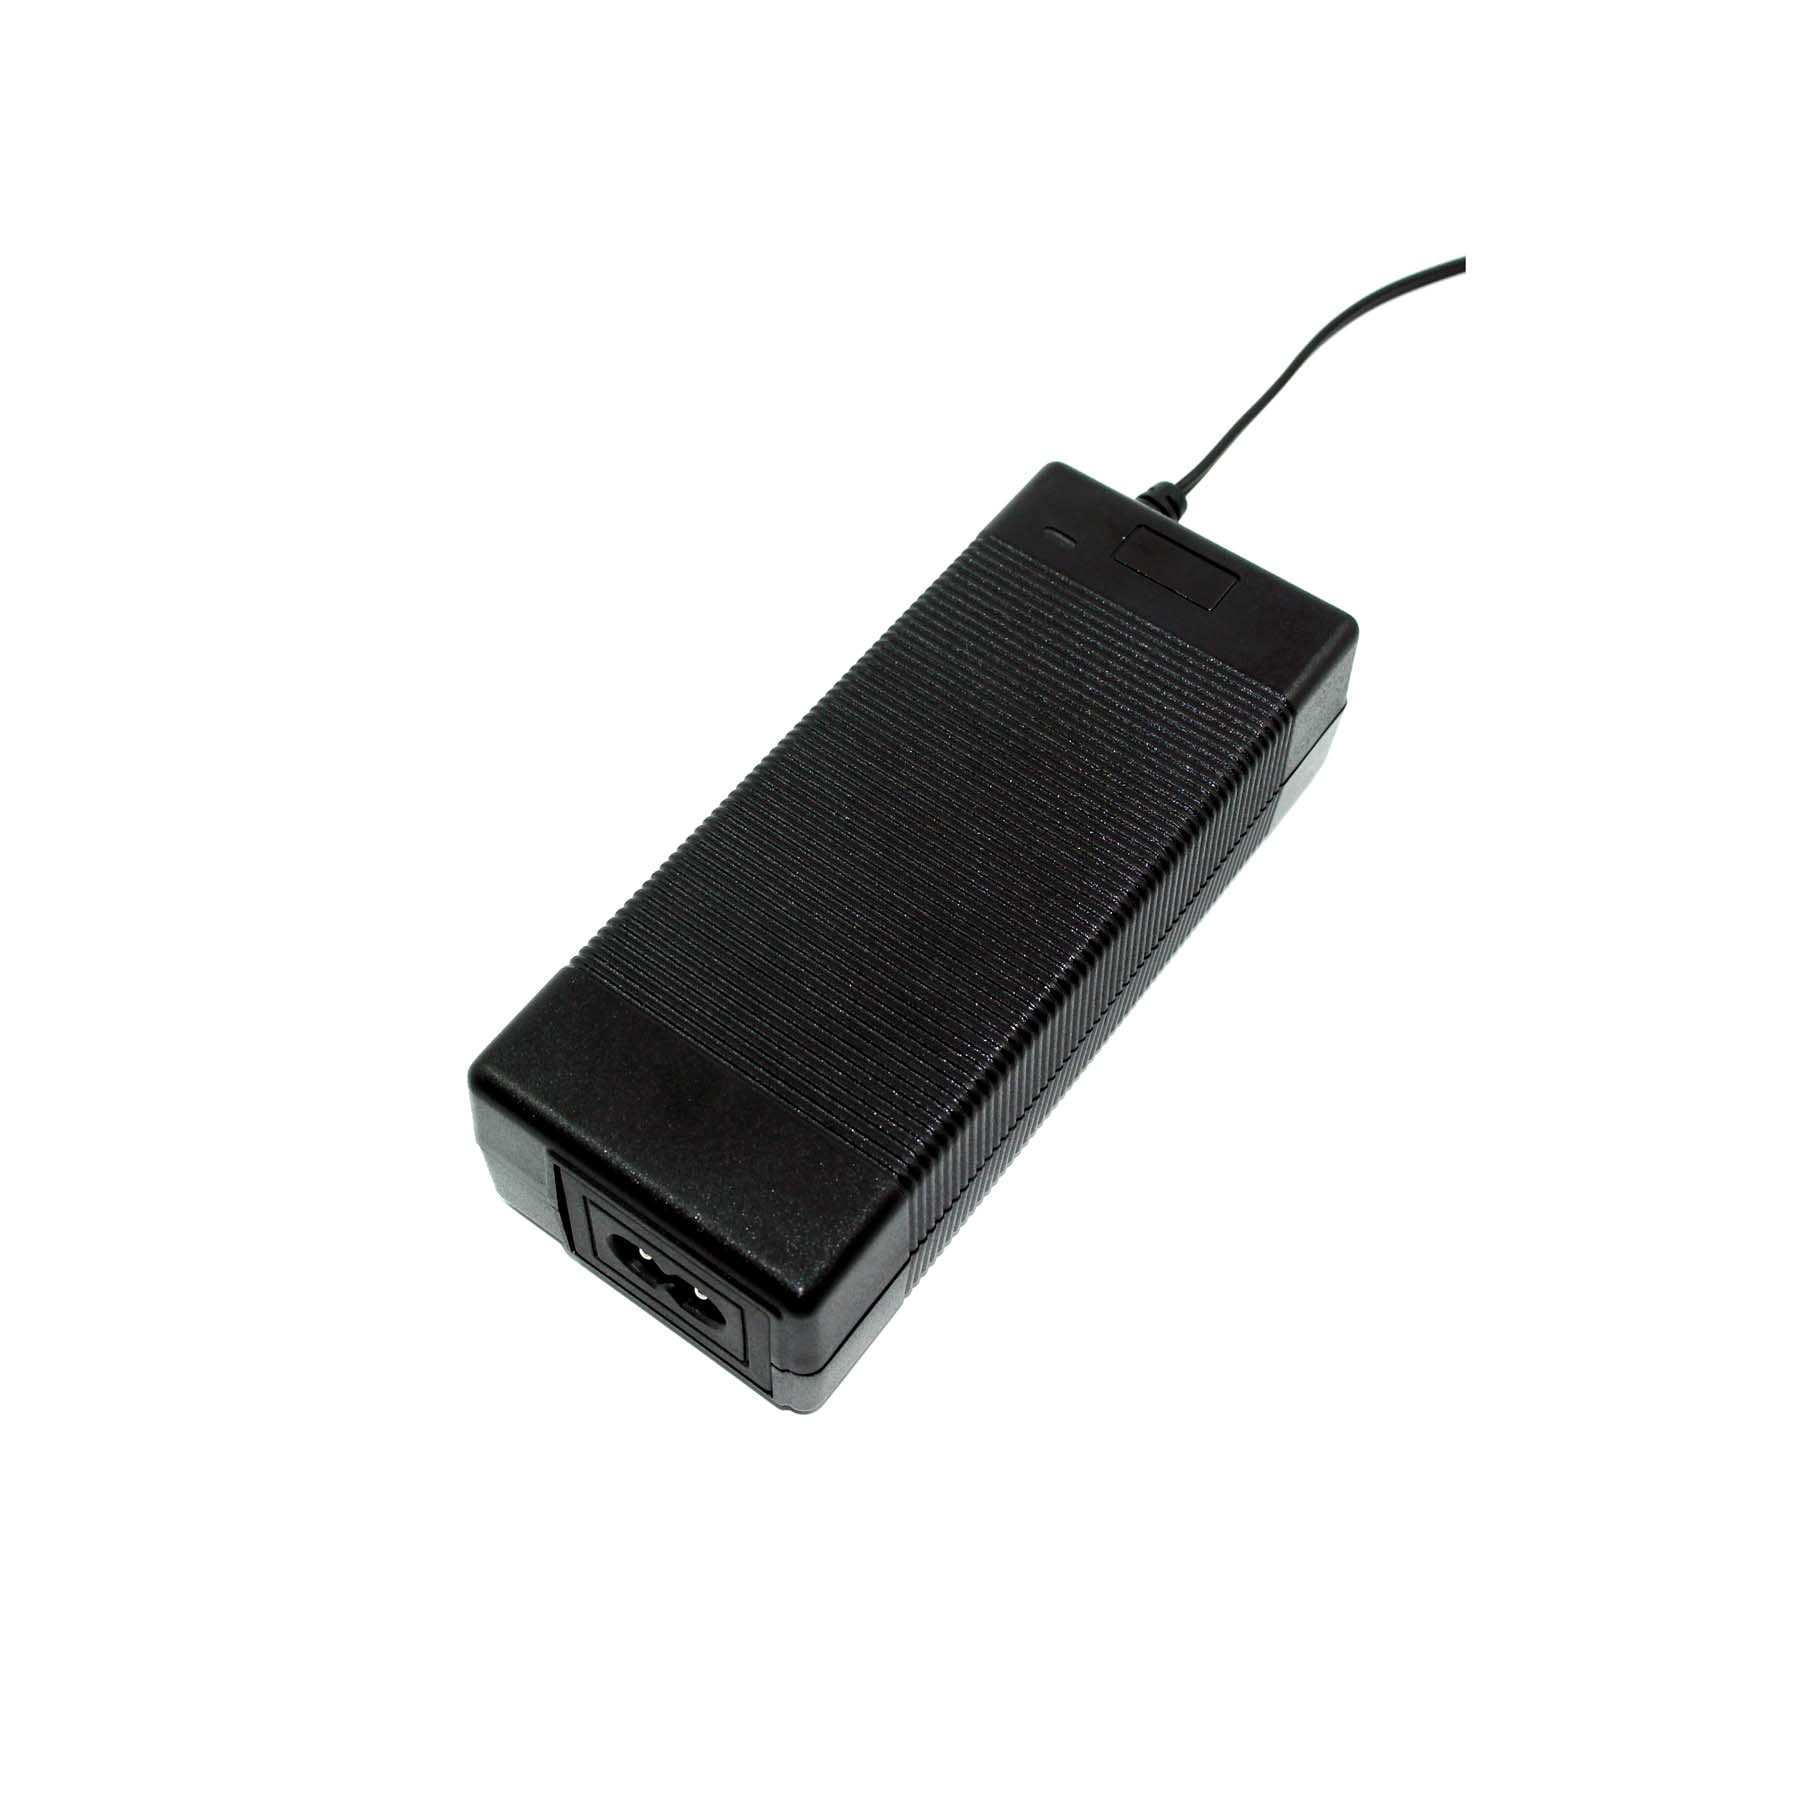 KRE050SPS-2402R08D,24V 2.08A 50W Switching power adapter, C8 connector CE FCC EMC ROHS